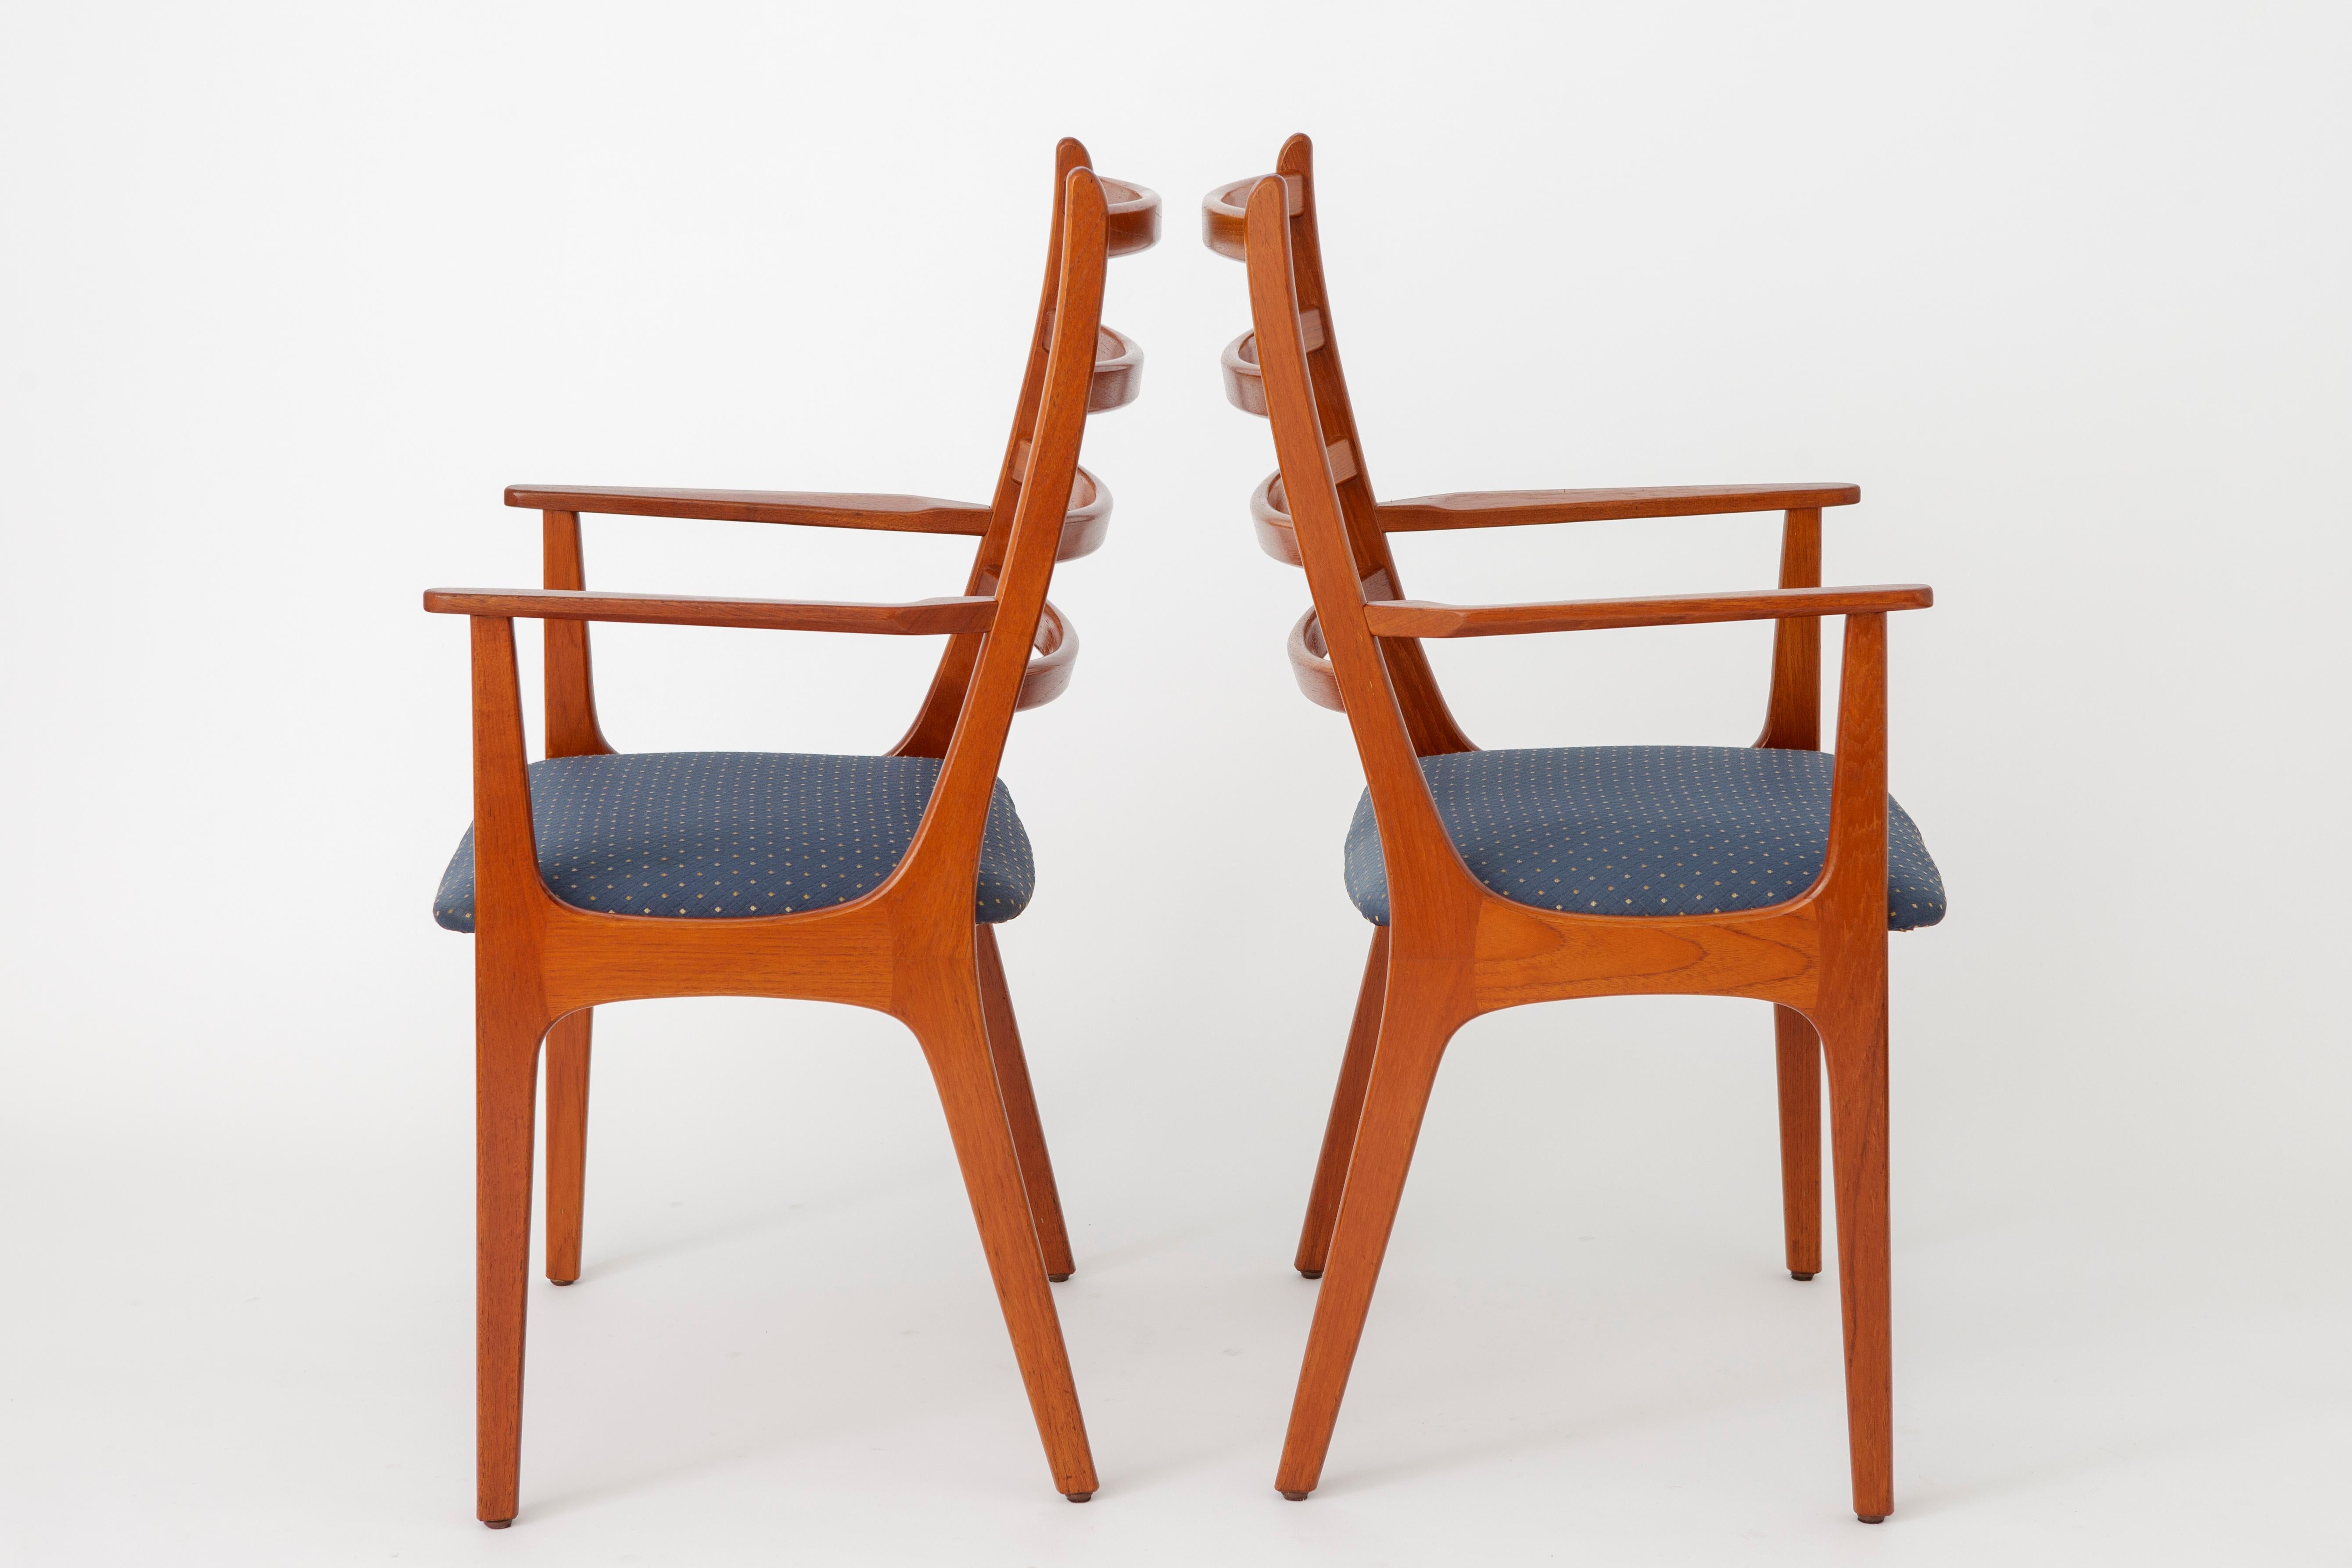 Polished 2 Teak Dining chairs 1960s by KS Mobler, Denmark For Sale